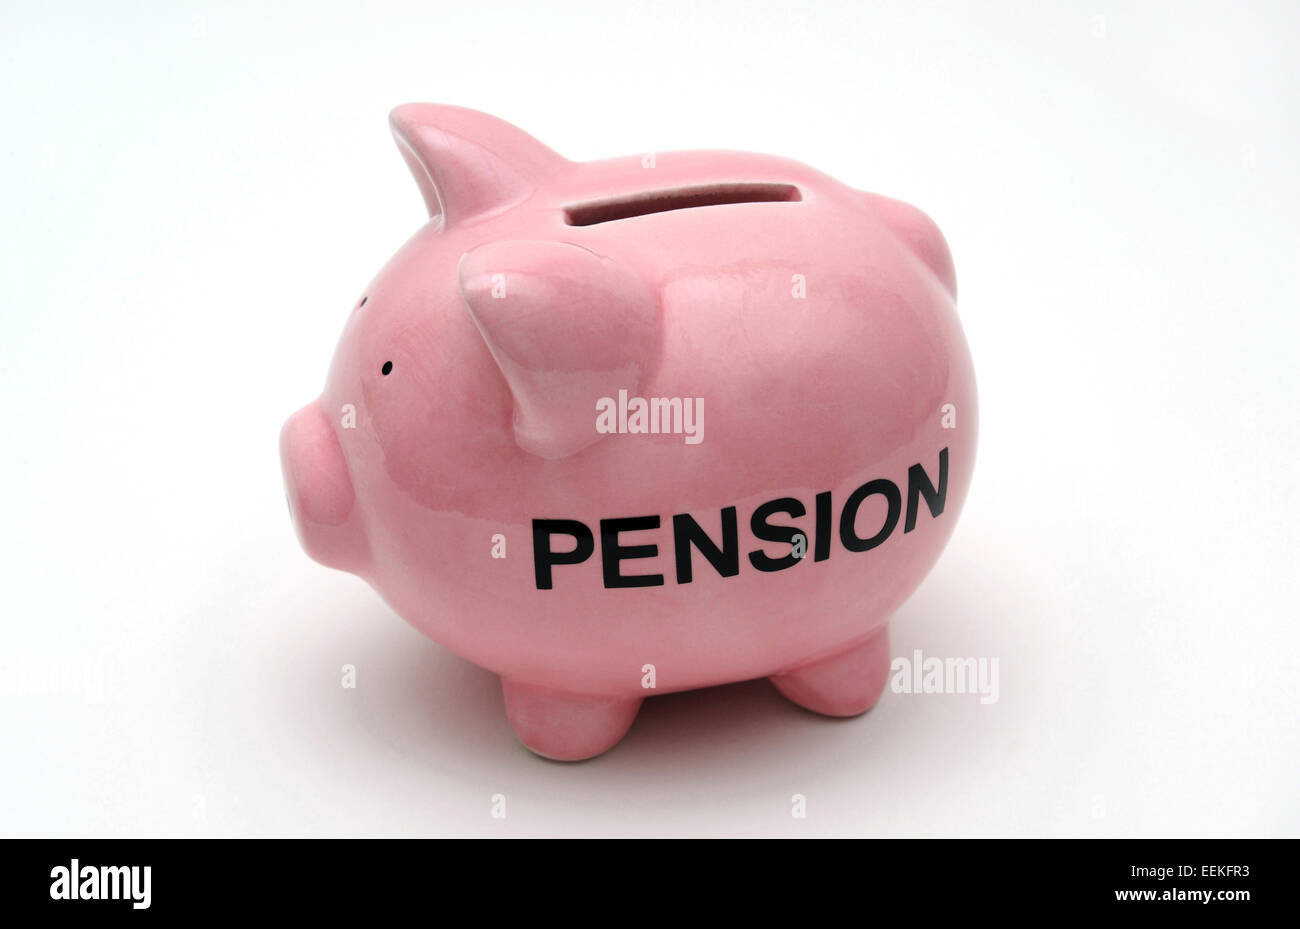 PIGGYBANK WITH PENSION WORD RE PENSIONS ANNUITY COMPANY SAVINGS CASH RETIREMENT INVESTMENTS PENSIONERS MONEY PRIVATE POT UK Stock Photo